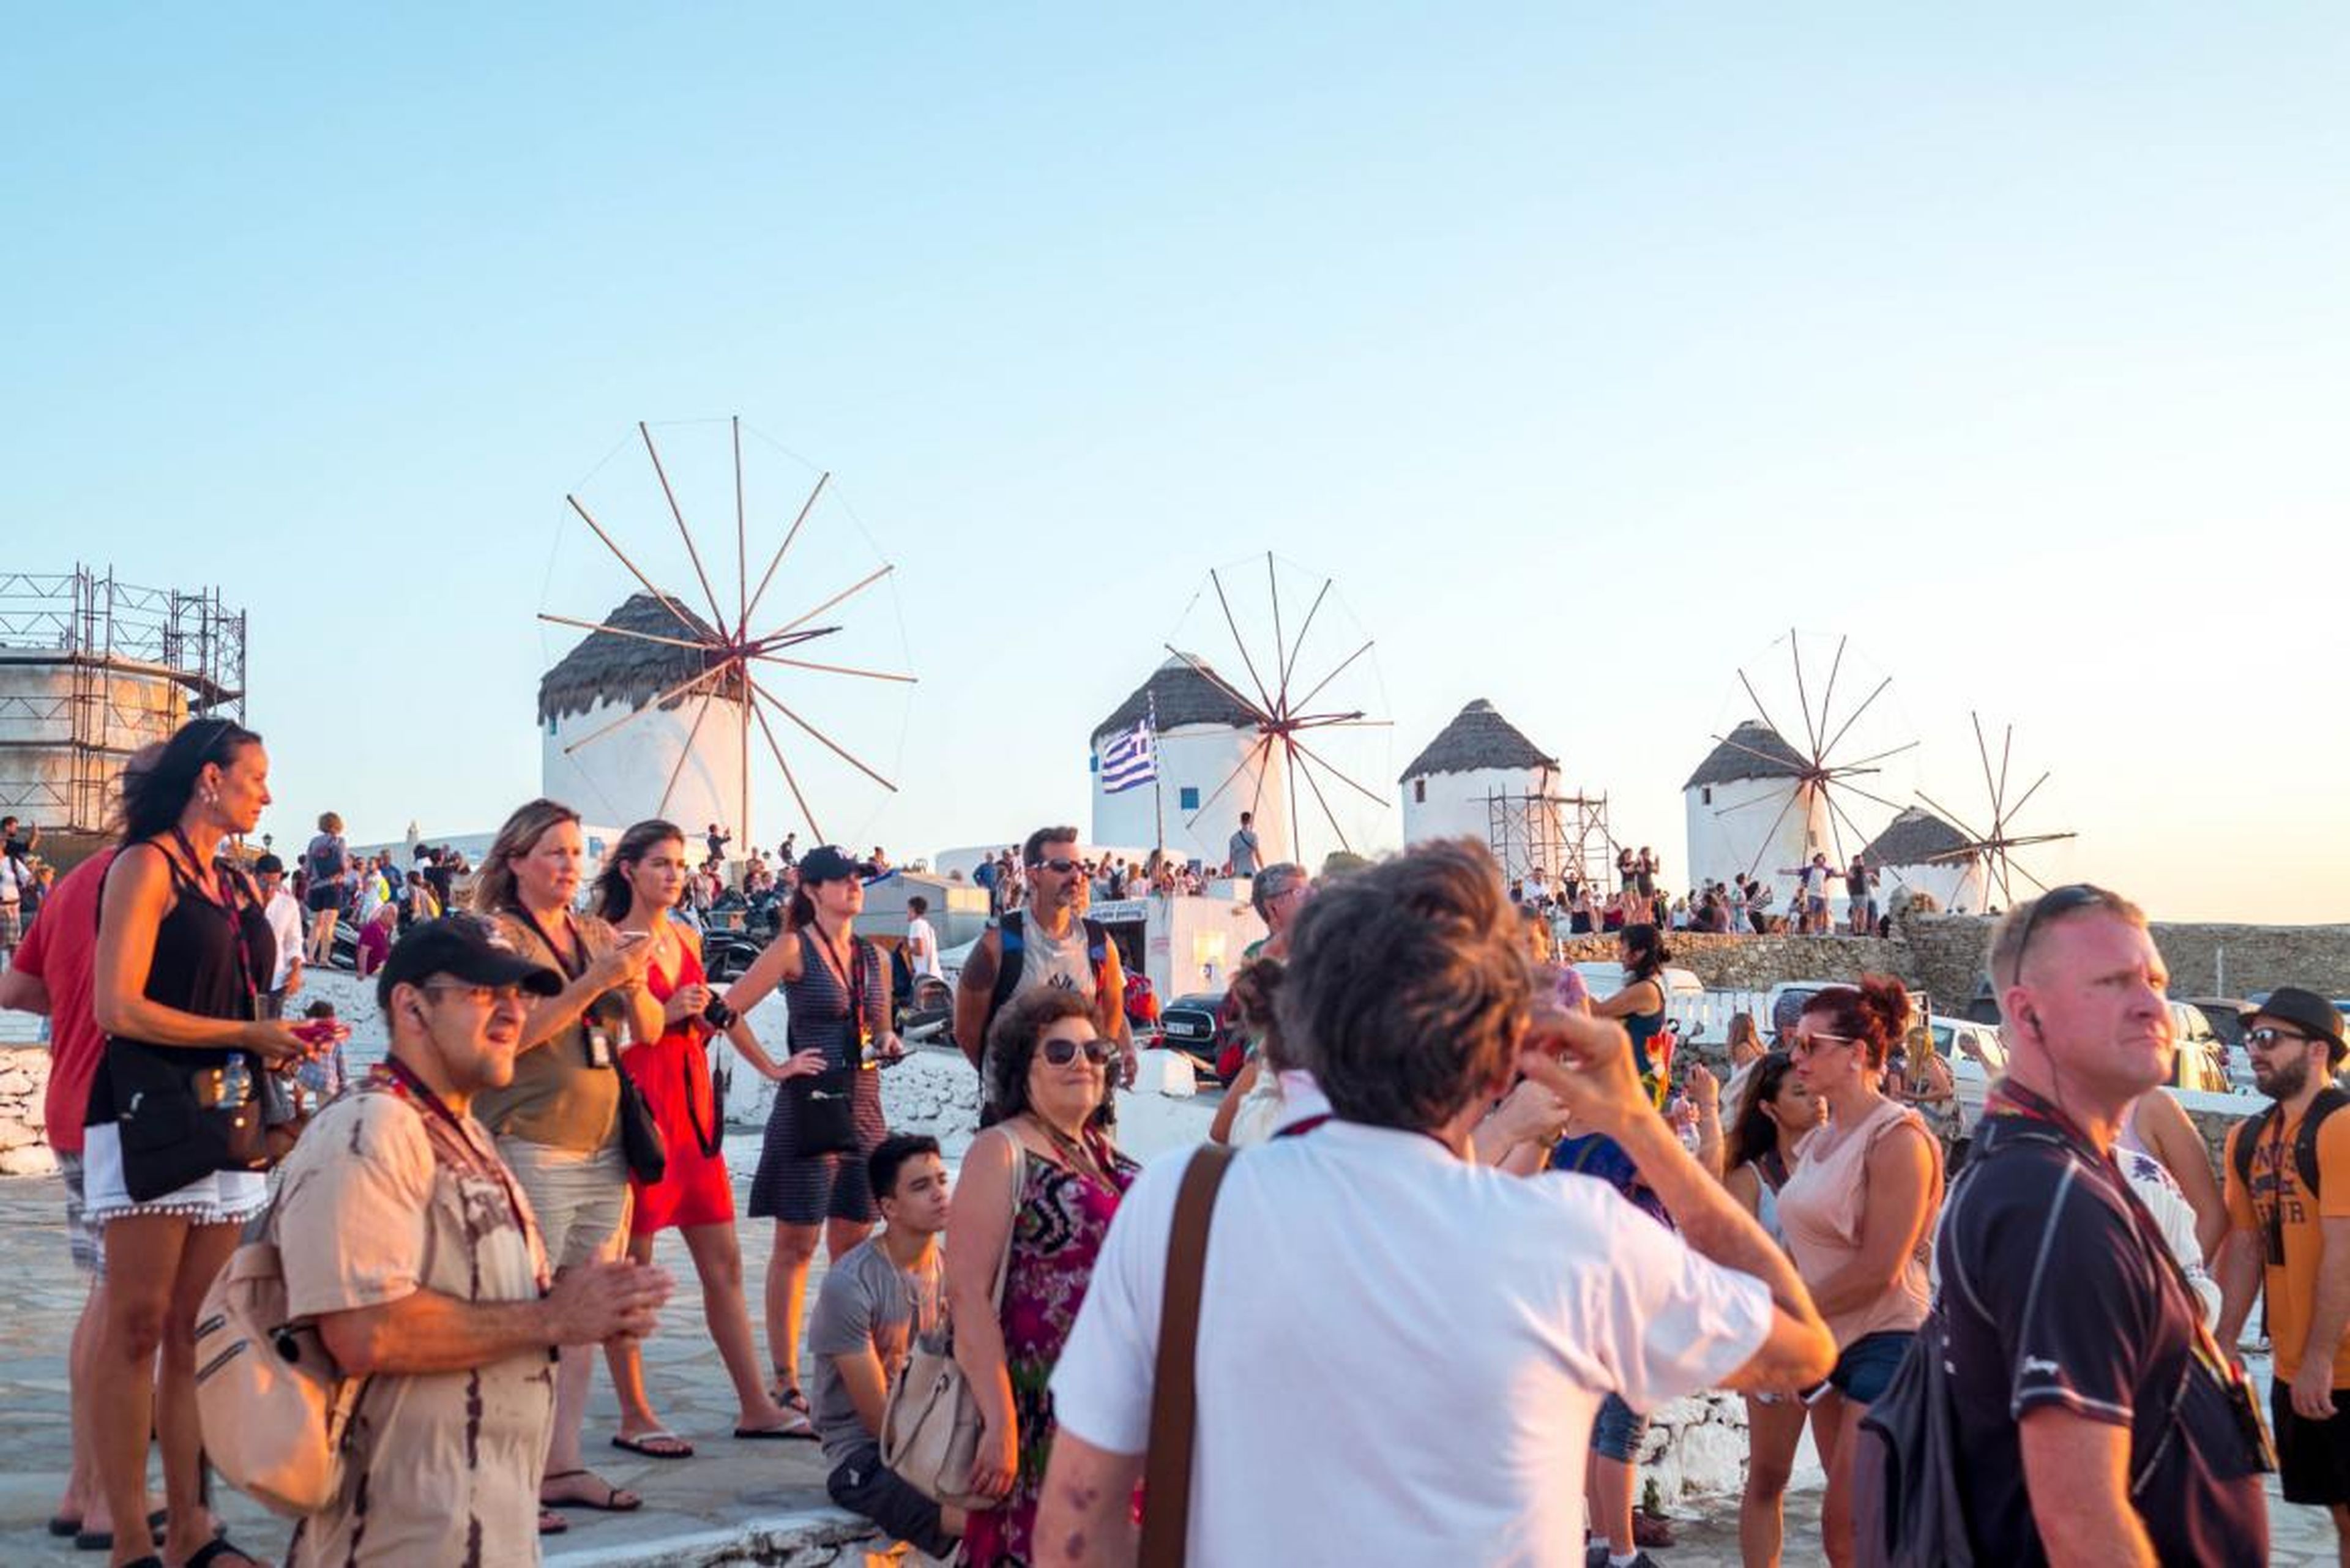 Outside of the beaches, the main thing to see in Mykonos is the windmills that sit above the Hora, or main town of the island. But during sunset, and when the cruise-shippers come in, the area is swarmed with people trying to get